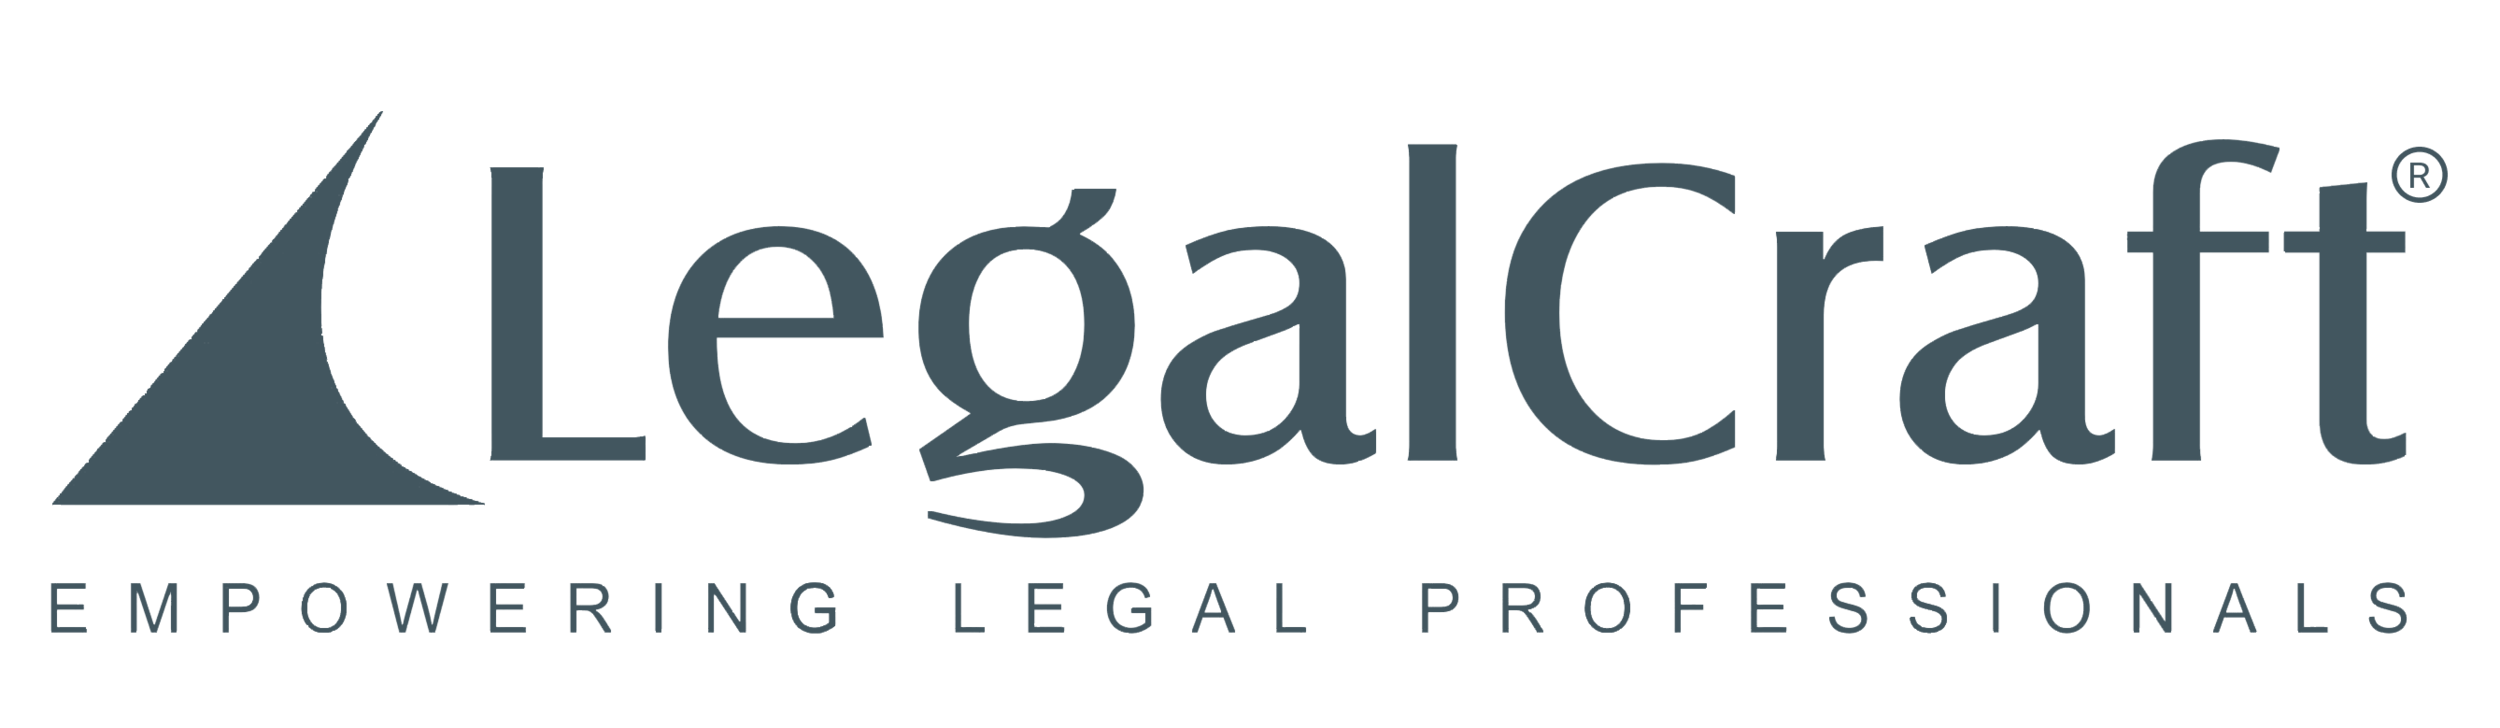 logo-legalcraft.png